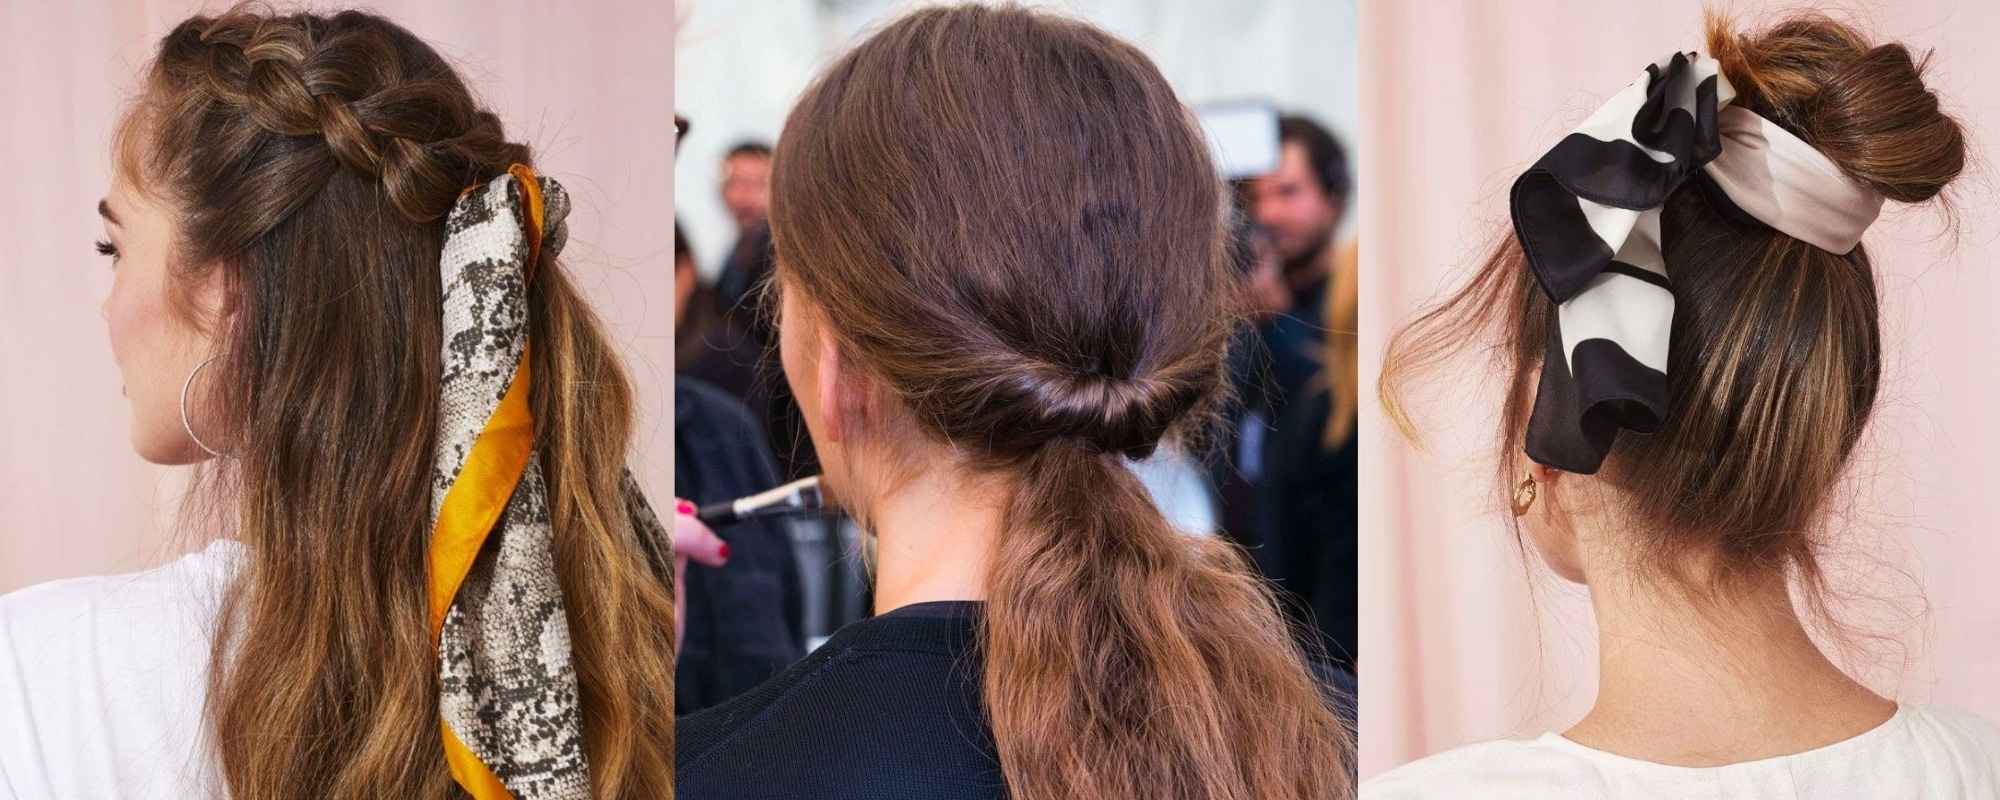 20 Messy Bun Hairstyle Ideas That'll Still Have You Looking Polished